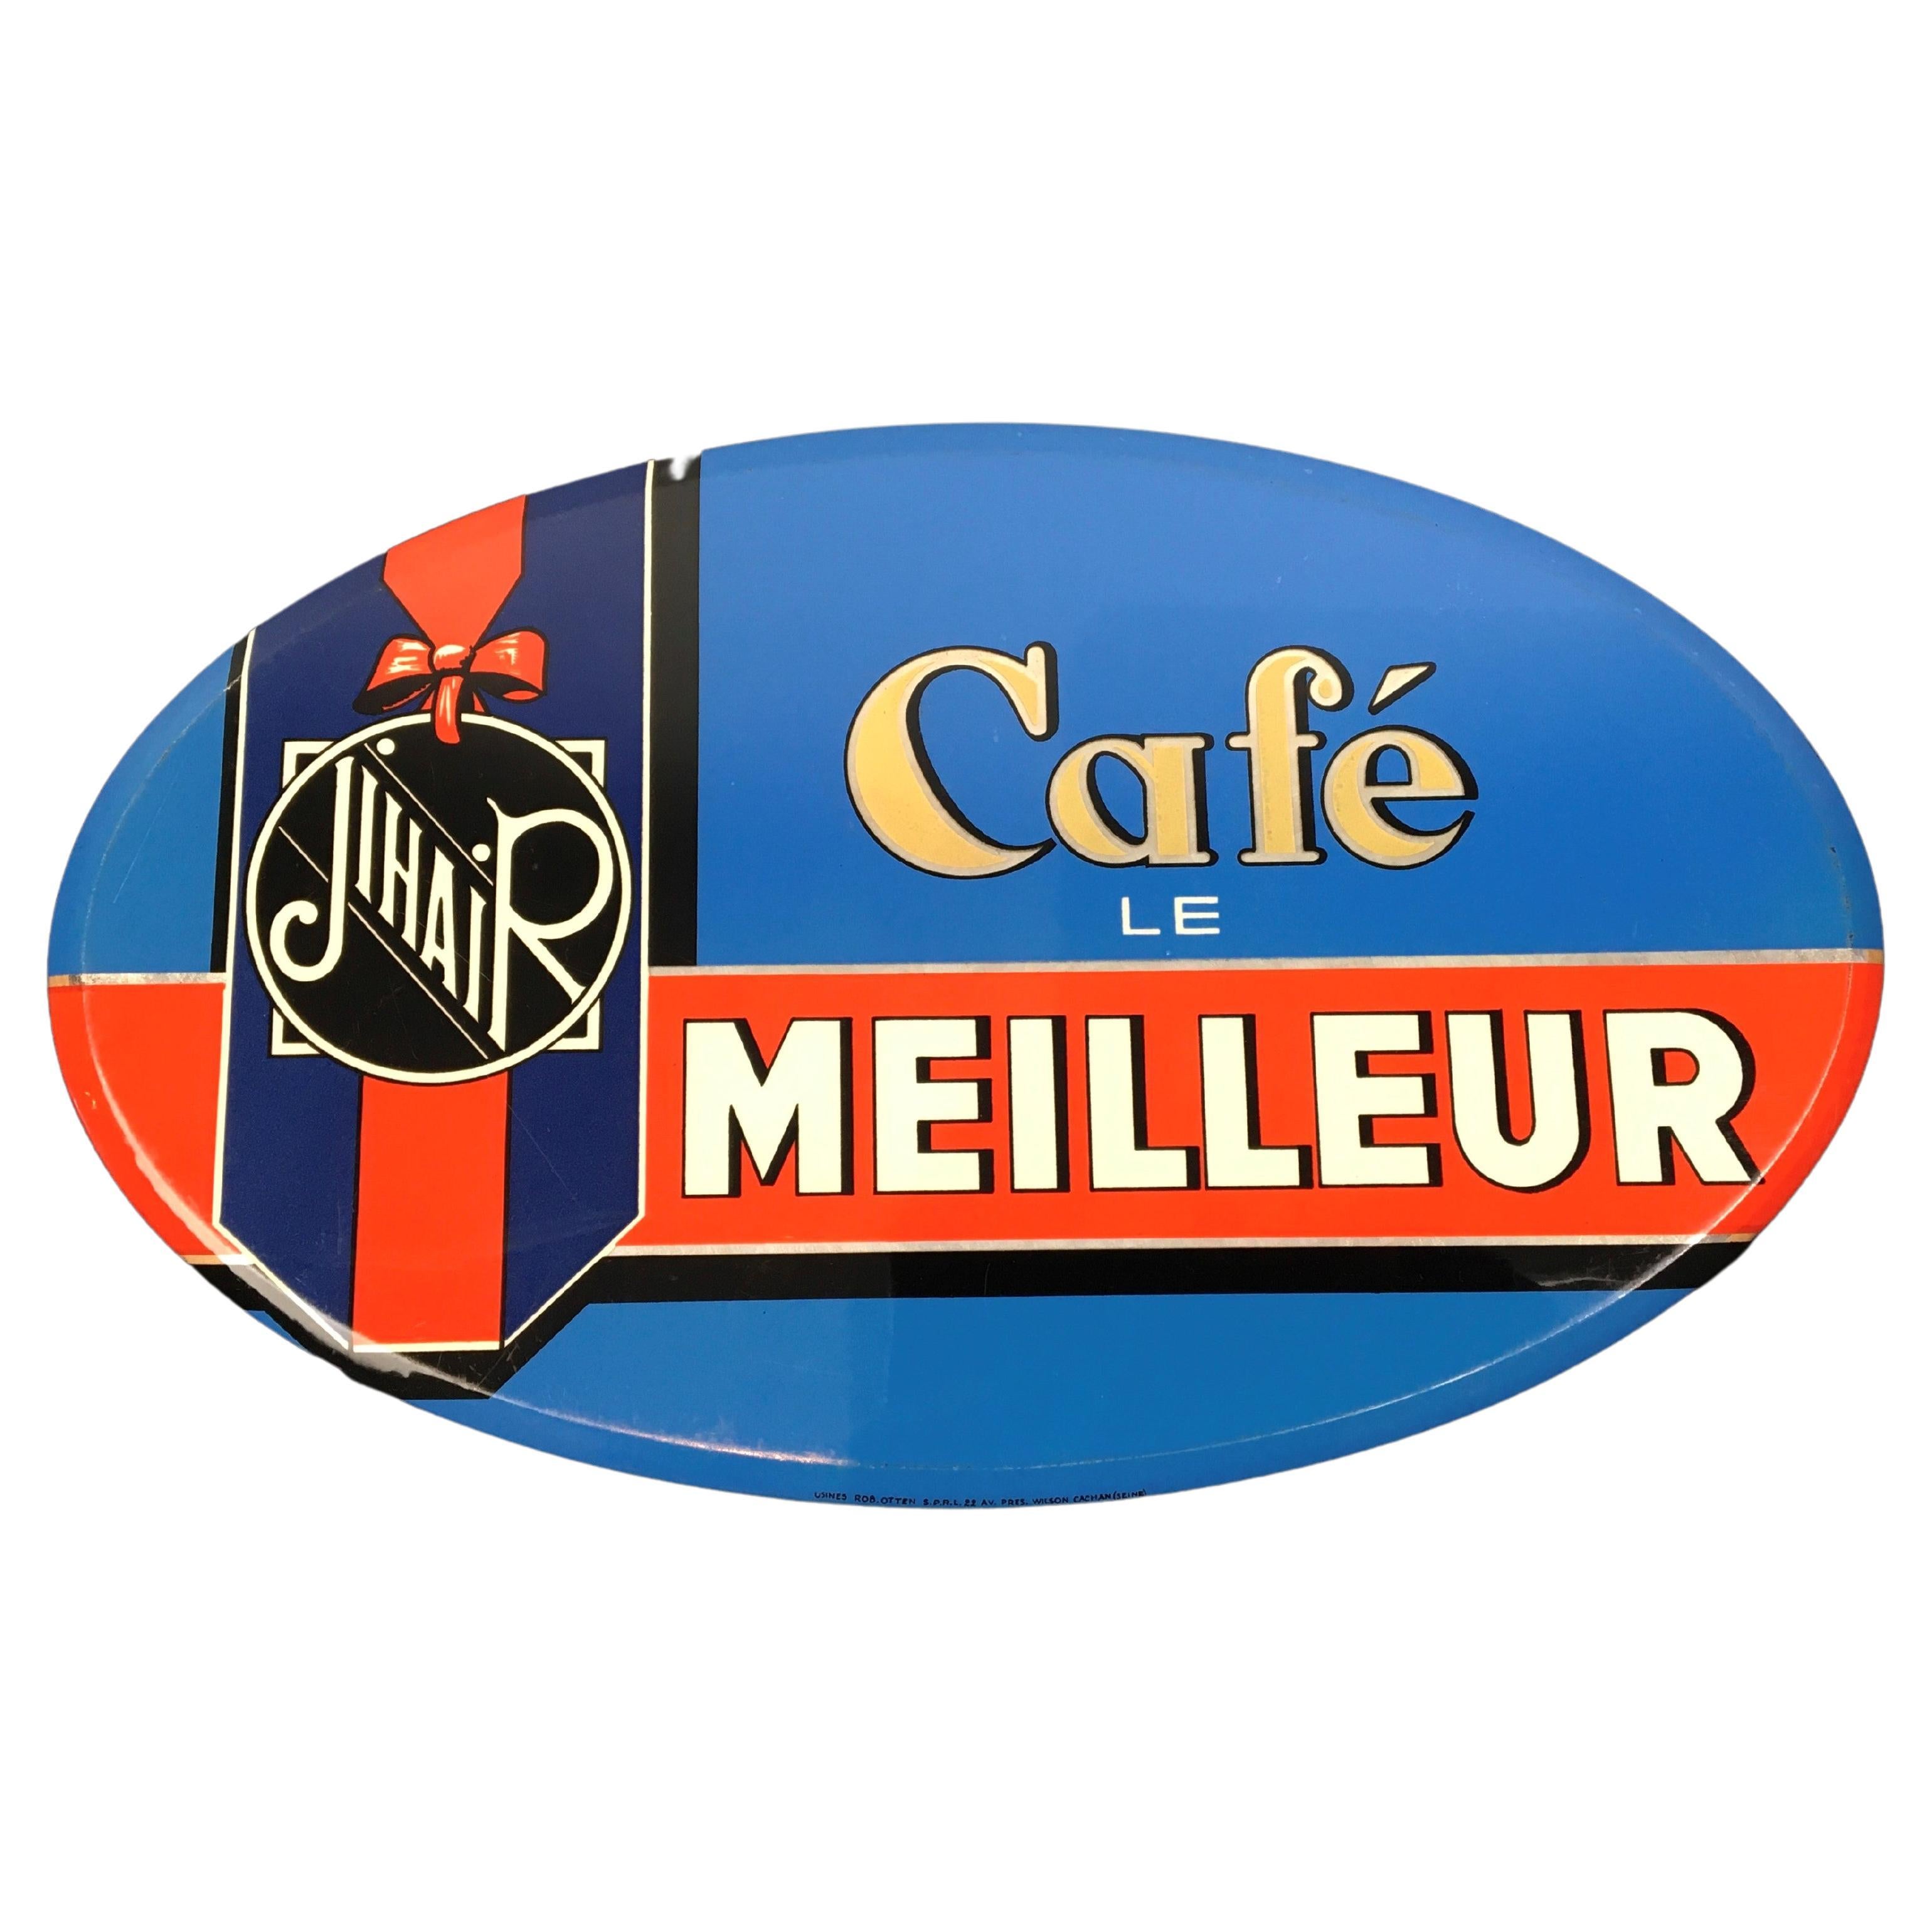 1950s Modern French Wall Sign for Coffee